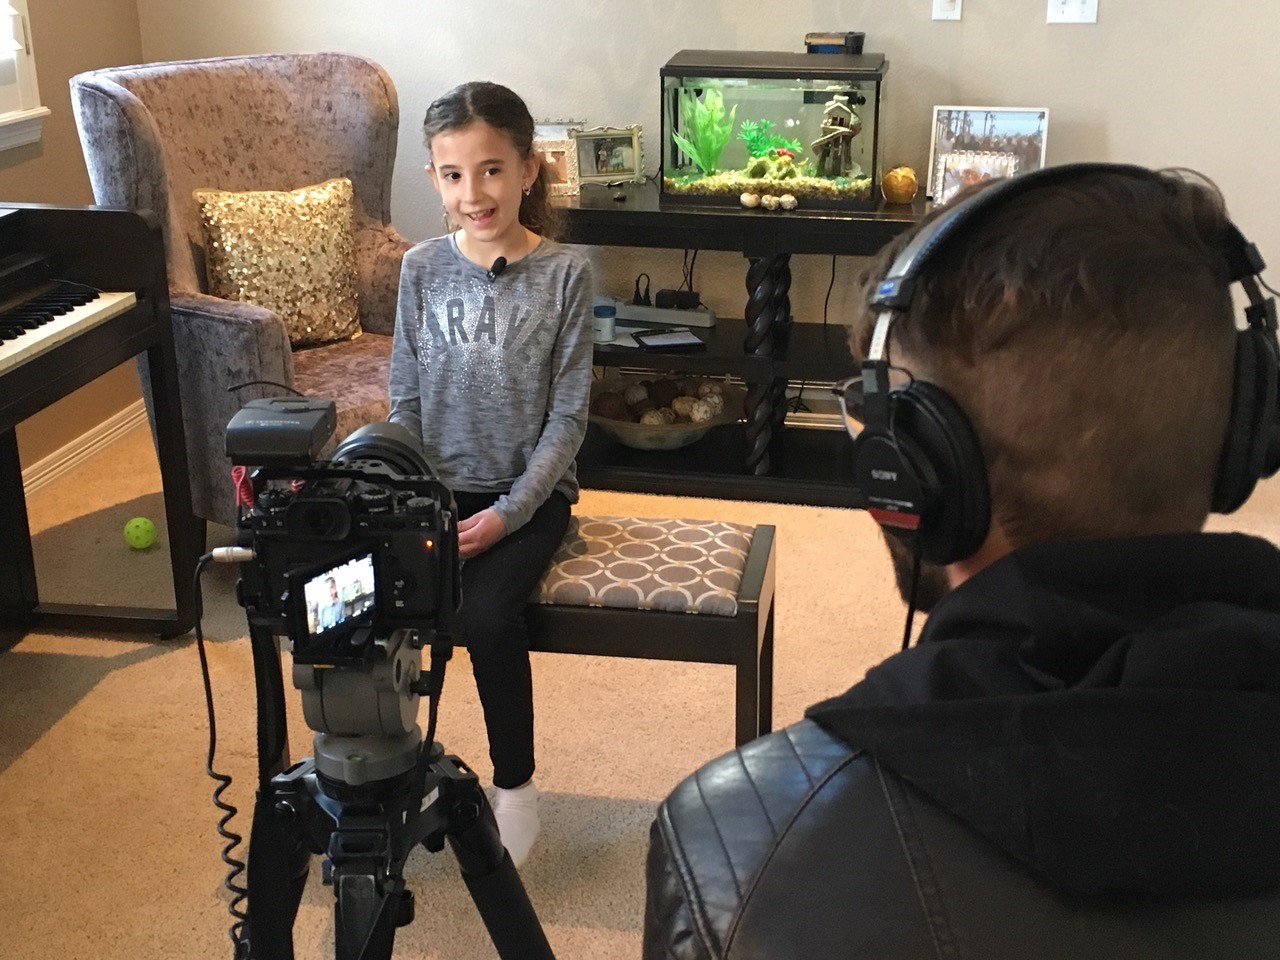 Young girl with cochlear implants getting interviewed